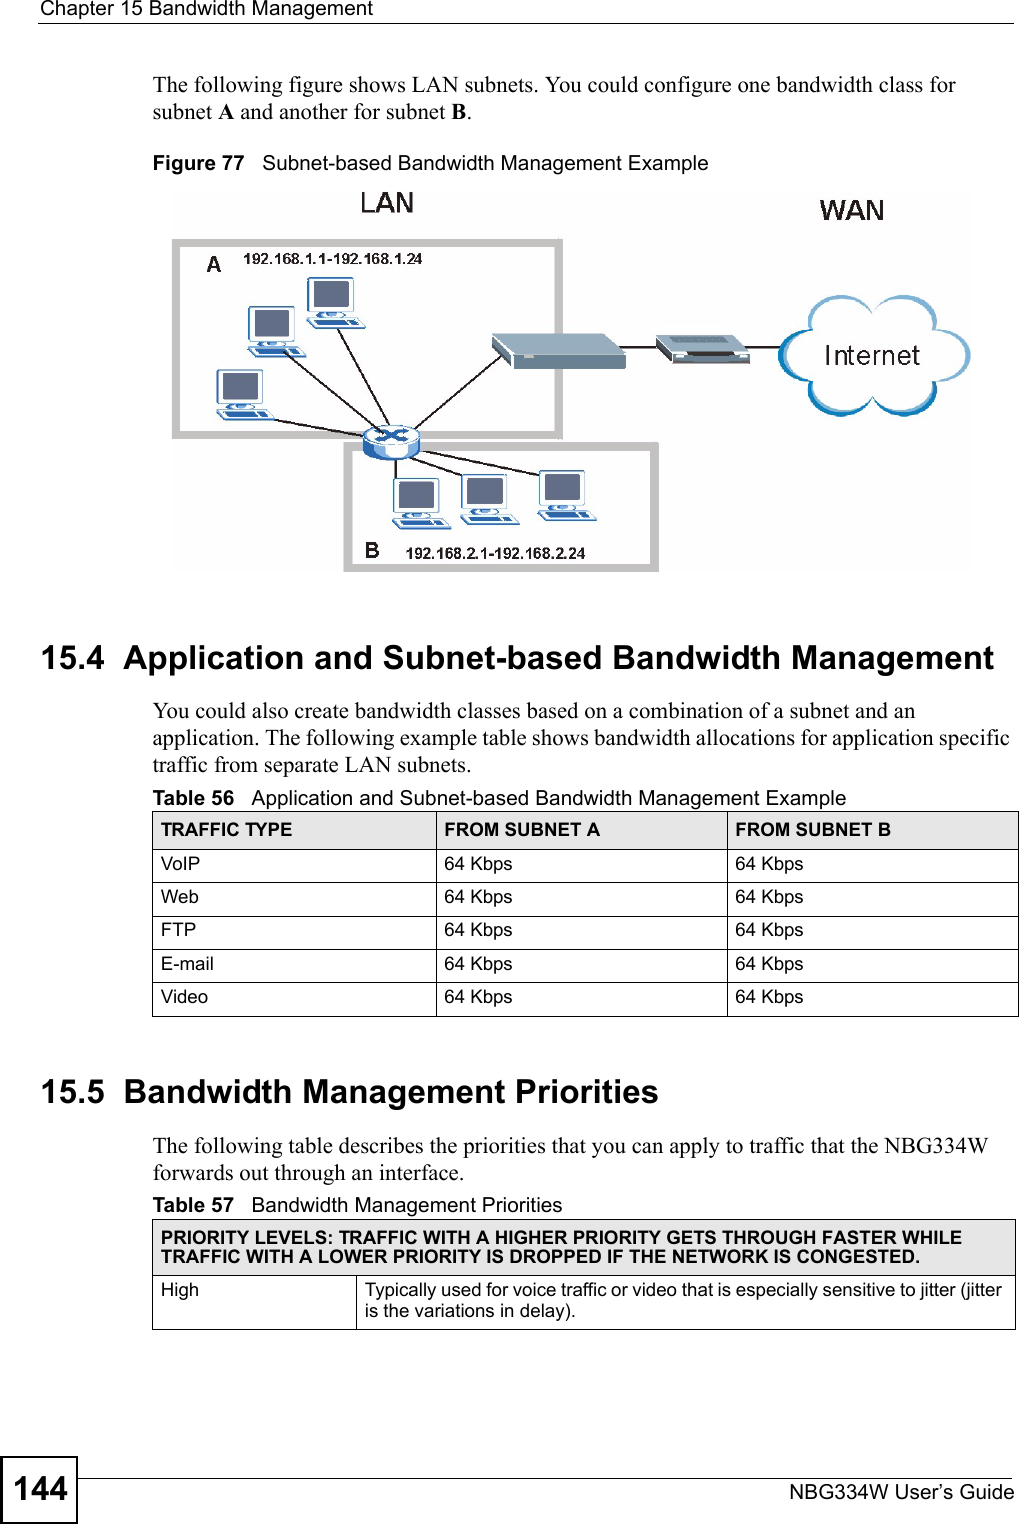 Chapter 15 Bandwidth ManagementNBG334W User’s Guide144The following figure shows LAN subnets. You could configure one bandwidth class for subnet A and another for subnet B. Figure 77   Subnet-based Bandwidth Management Example15.4  Application and Subnet-based Bandwidth ManagementYou could also create bandwidth classes based on a combination of a subnet and an application. The following example table shows bandwidth allocations for application specific traffic from separate LAN subnets.15.5  Bandwidth Management Priorities The following table describes the priorities that you can apply to traffic that the NBG334W forwards out through an interface.Table 56   Application and Subnet-based Bandwidth Management Example TRAFFIC TYPE FROM SUBNET A FROM SUBNET BVoIP 64 Kbps 64 KbpsWeb 64 Kbps 64 KbpsFTP 64 Kbps 64 KbpsE-mail 64 Kbps 64 KbpsVideo 64 Kbps 64 KbpsTable 57   Bandwidth Management PrioritiesPRIORITY LEVELS: TRAFFIC WITH A HIGHER PRIORITY GETS THROUGH FASTER WHILE TRAFFIC WITH A LOWER PRIORITY IS DROPPED IF THE NETWORK IS CONGESTED.High Typically used for voice traffic or video that is especially sensitive to jitter (jitter is the variations in delay).